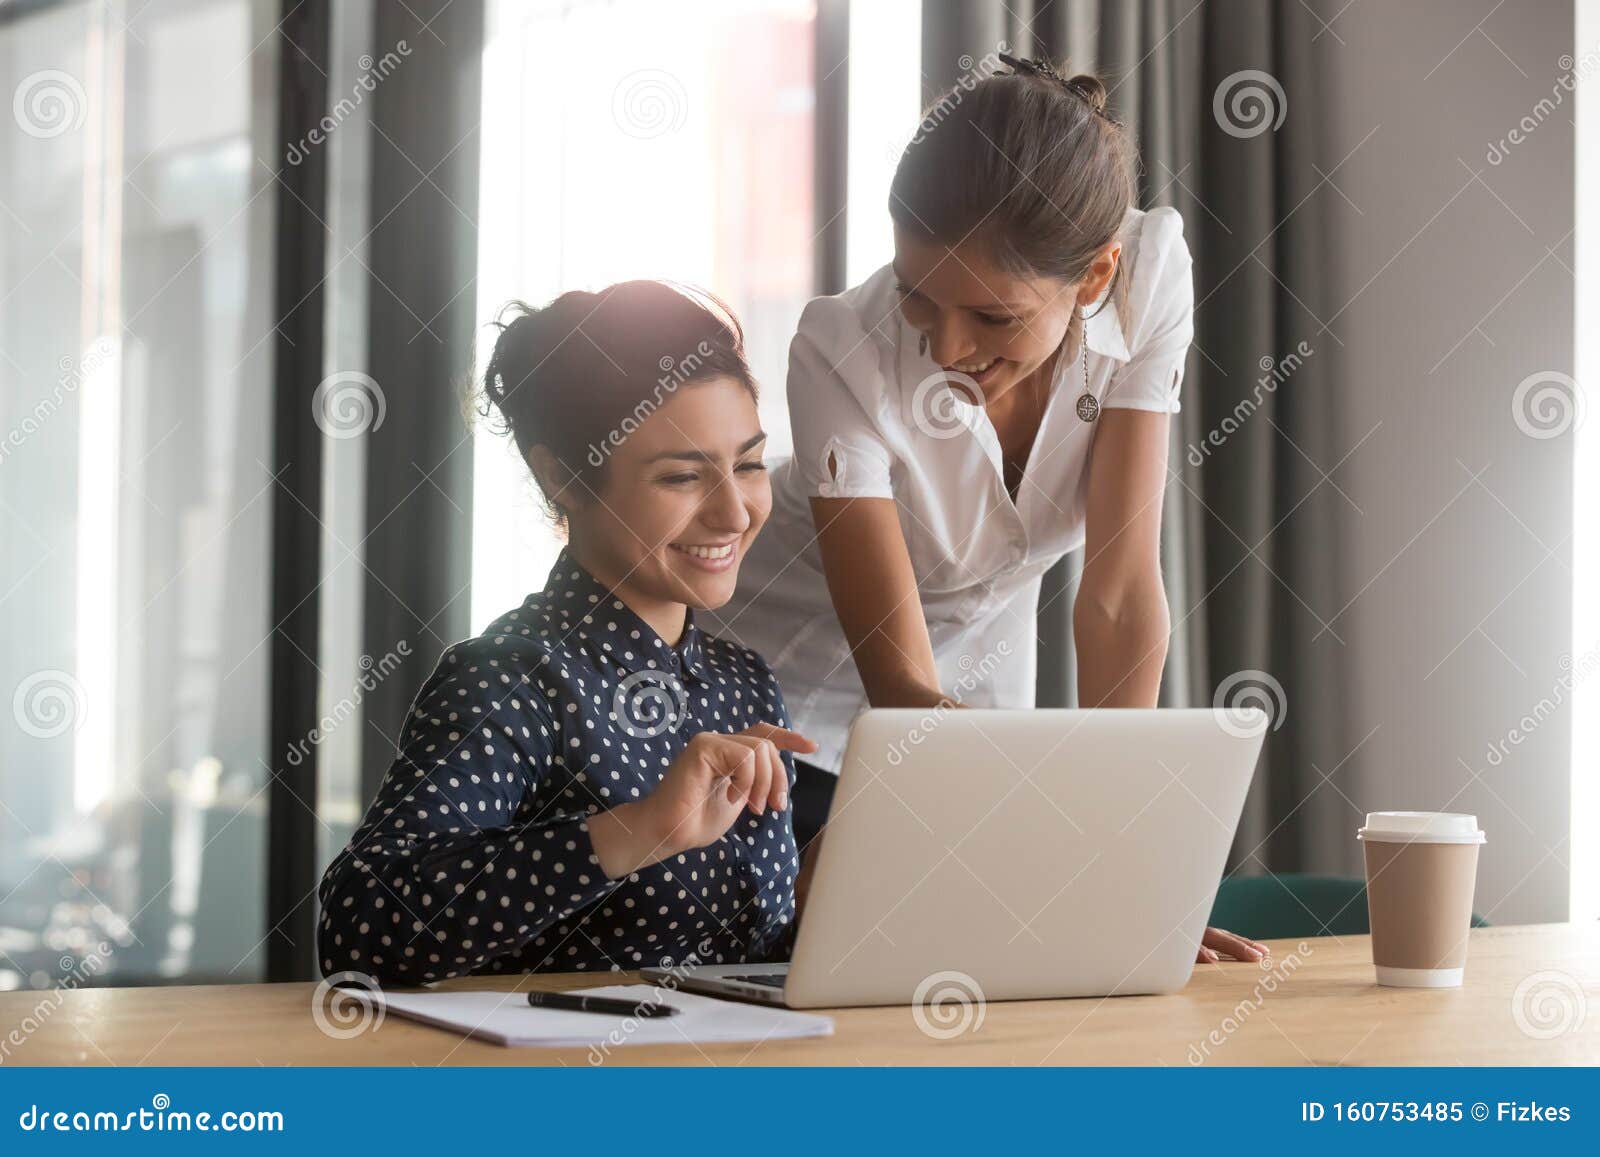 friendly caucasian mentor supervise indian intern secretary helping with computer